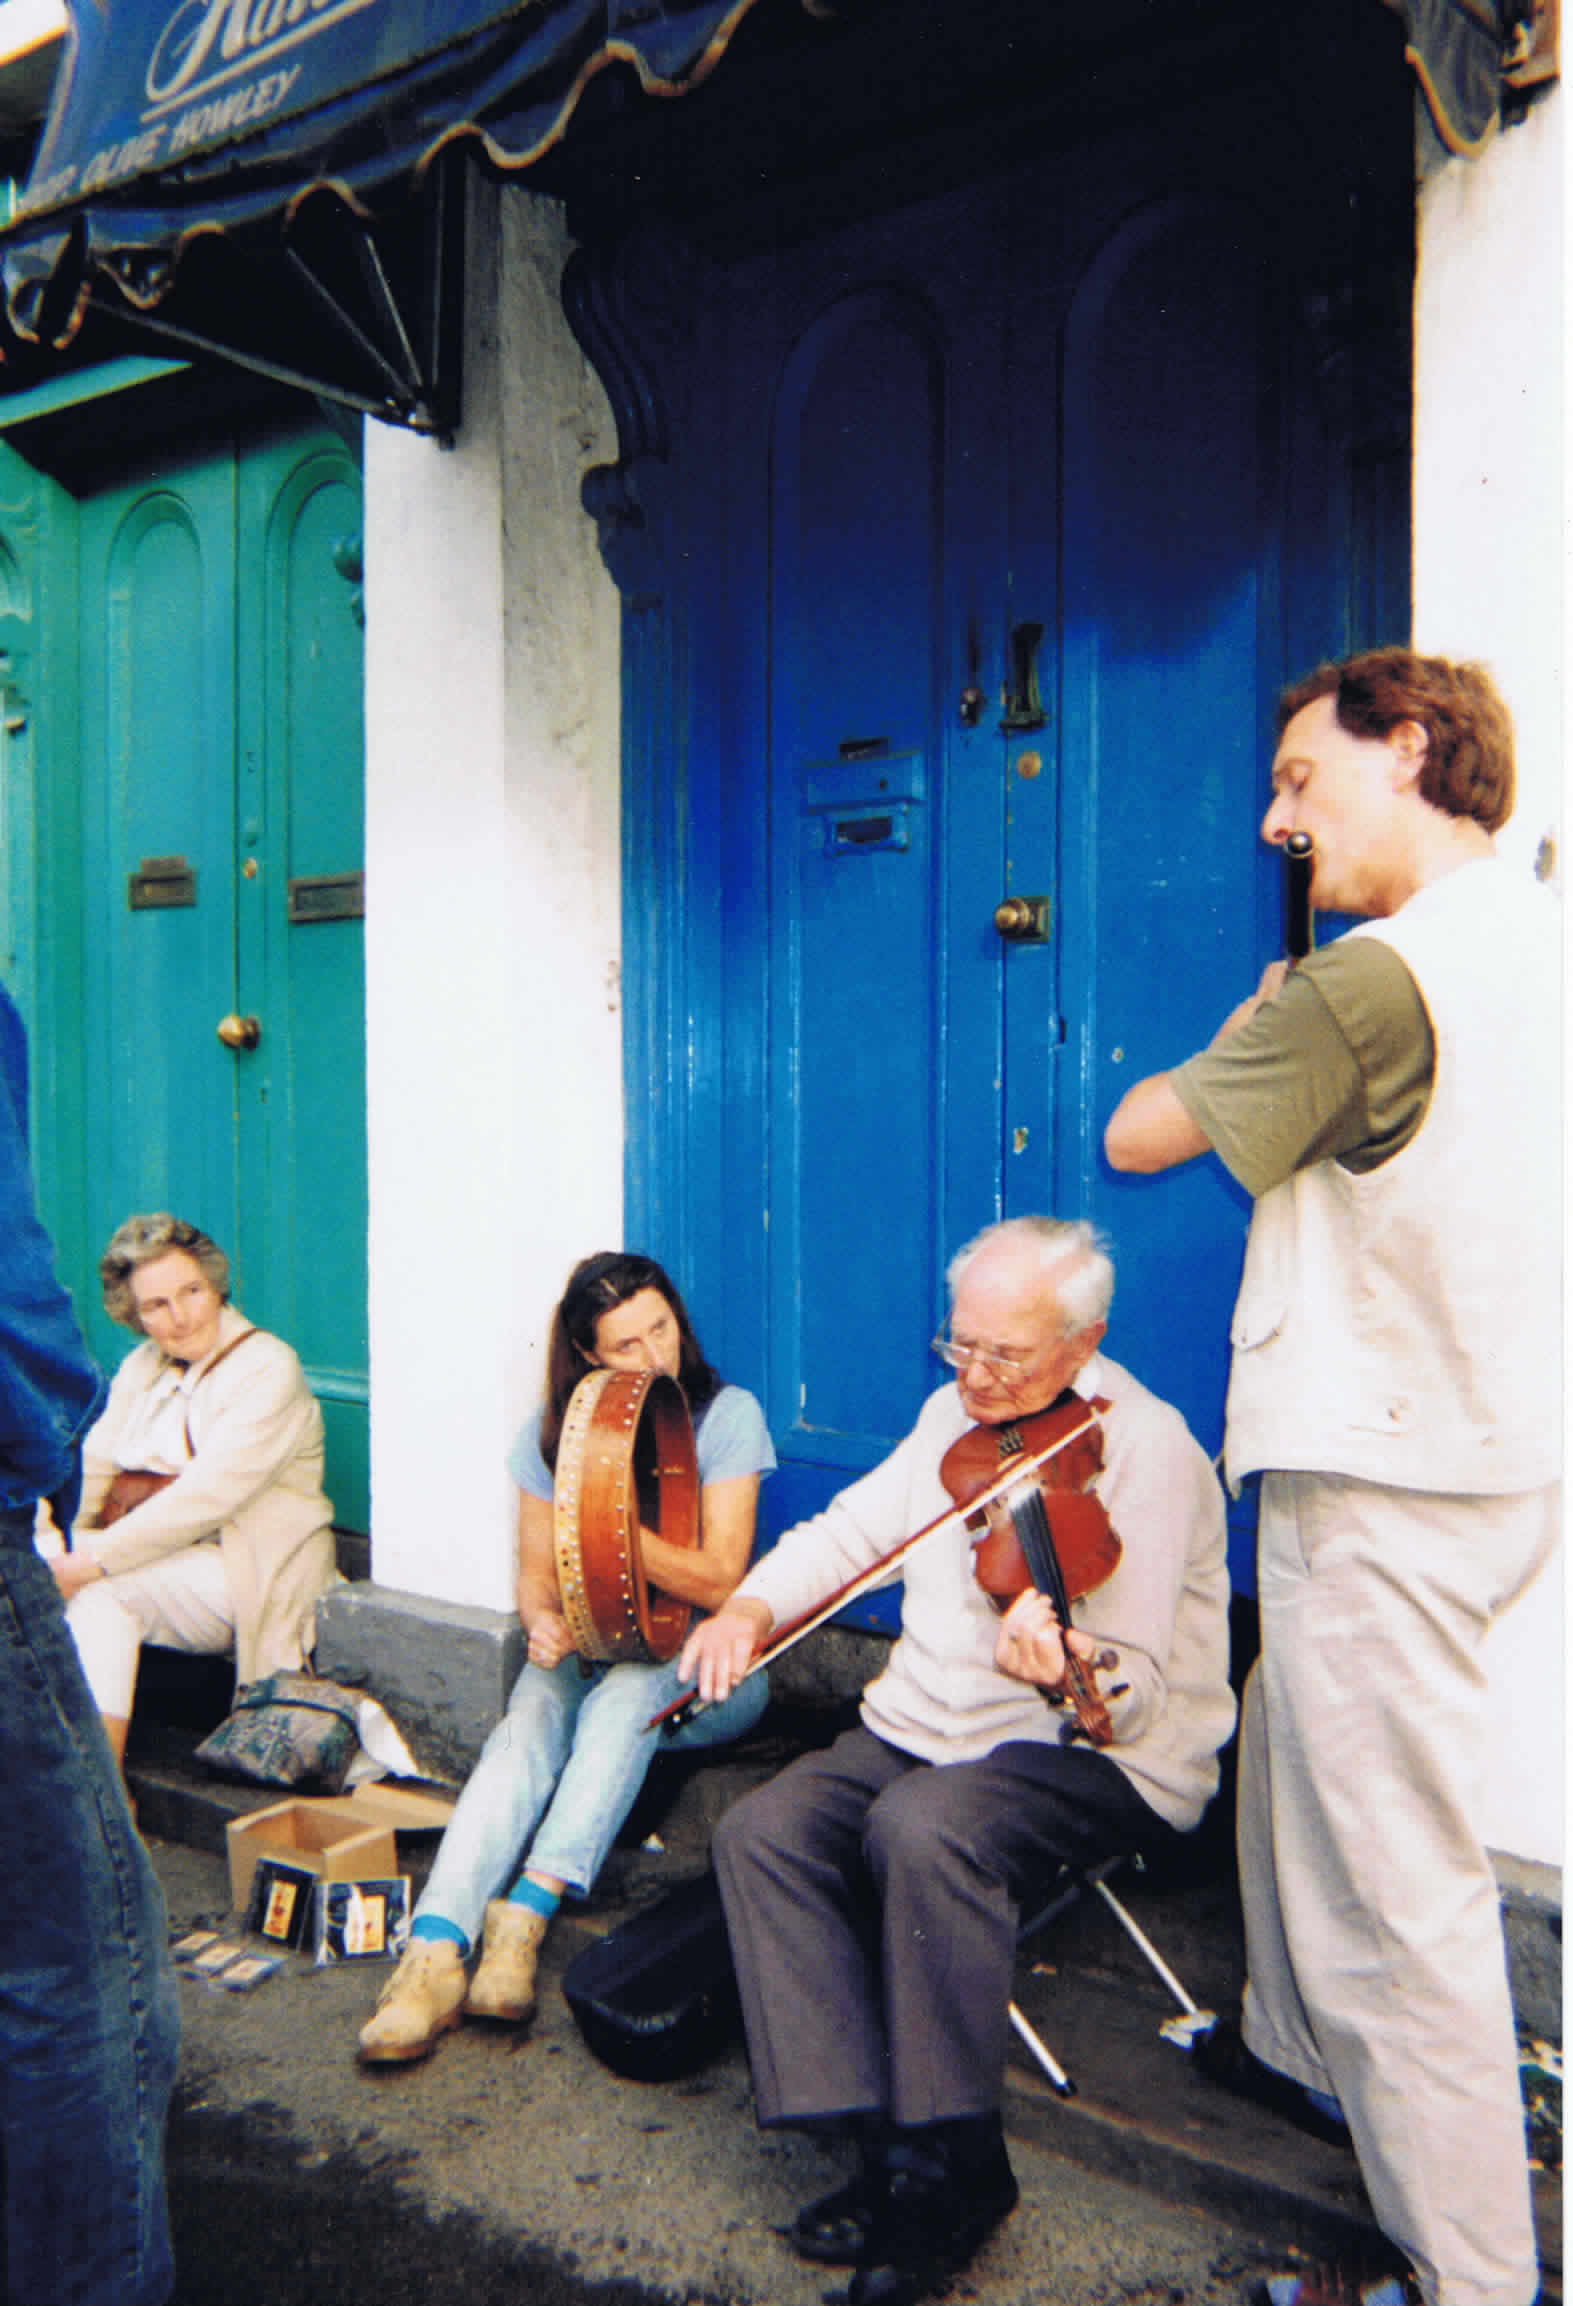 Sean, Kevin and Irene at a street session in the Fleadh Ceoil Ballina, 1997